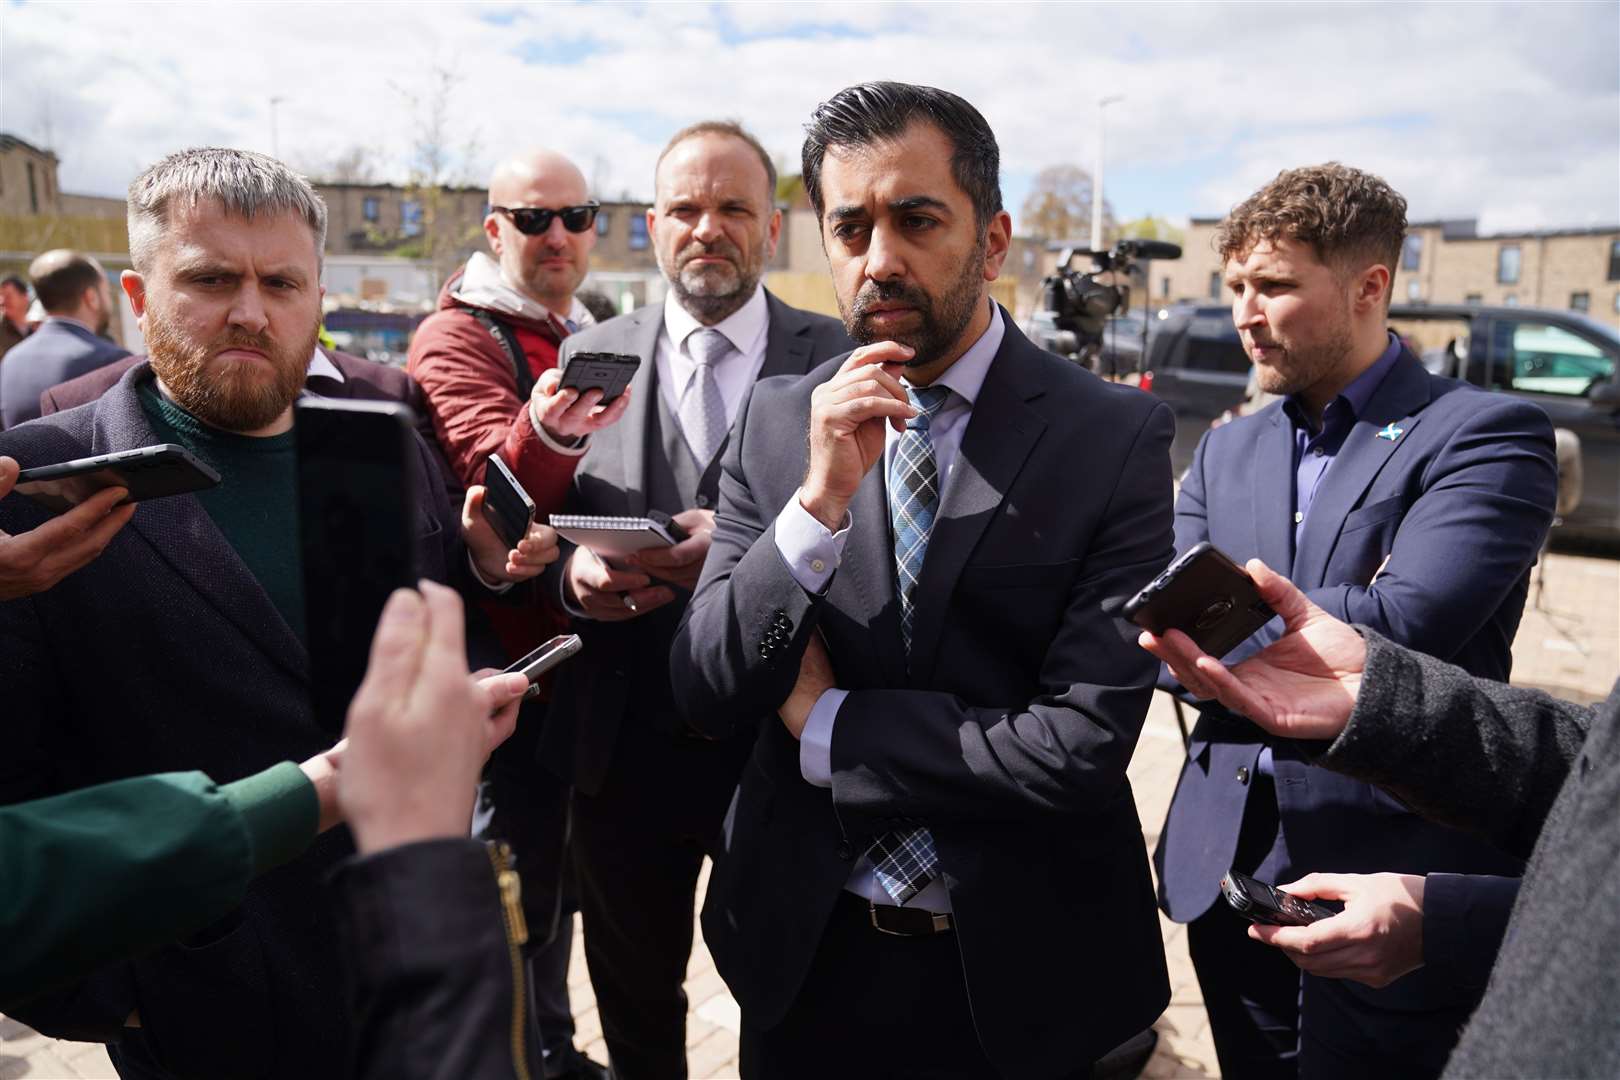 Humza Yousaf faces votes of no confidence (Andrew Milligan/PA)